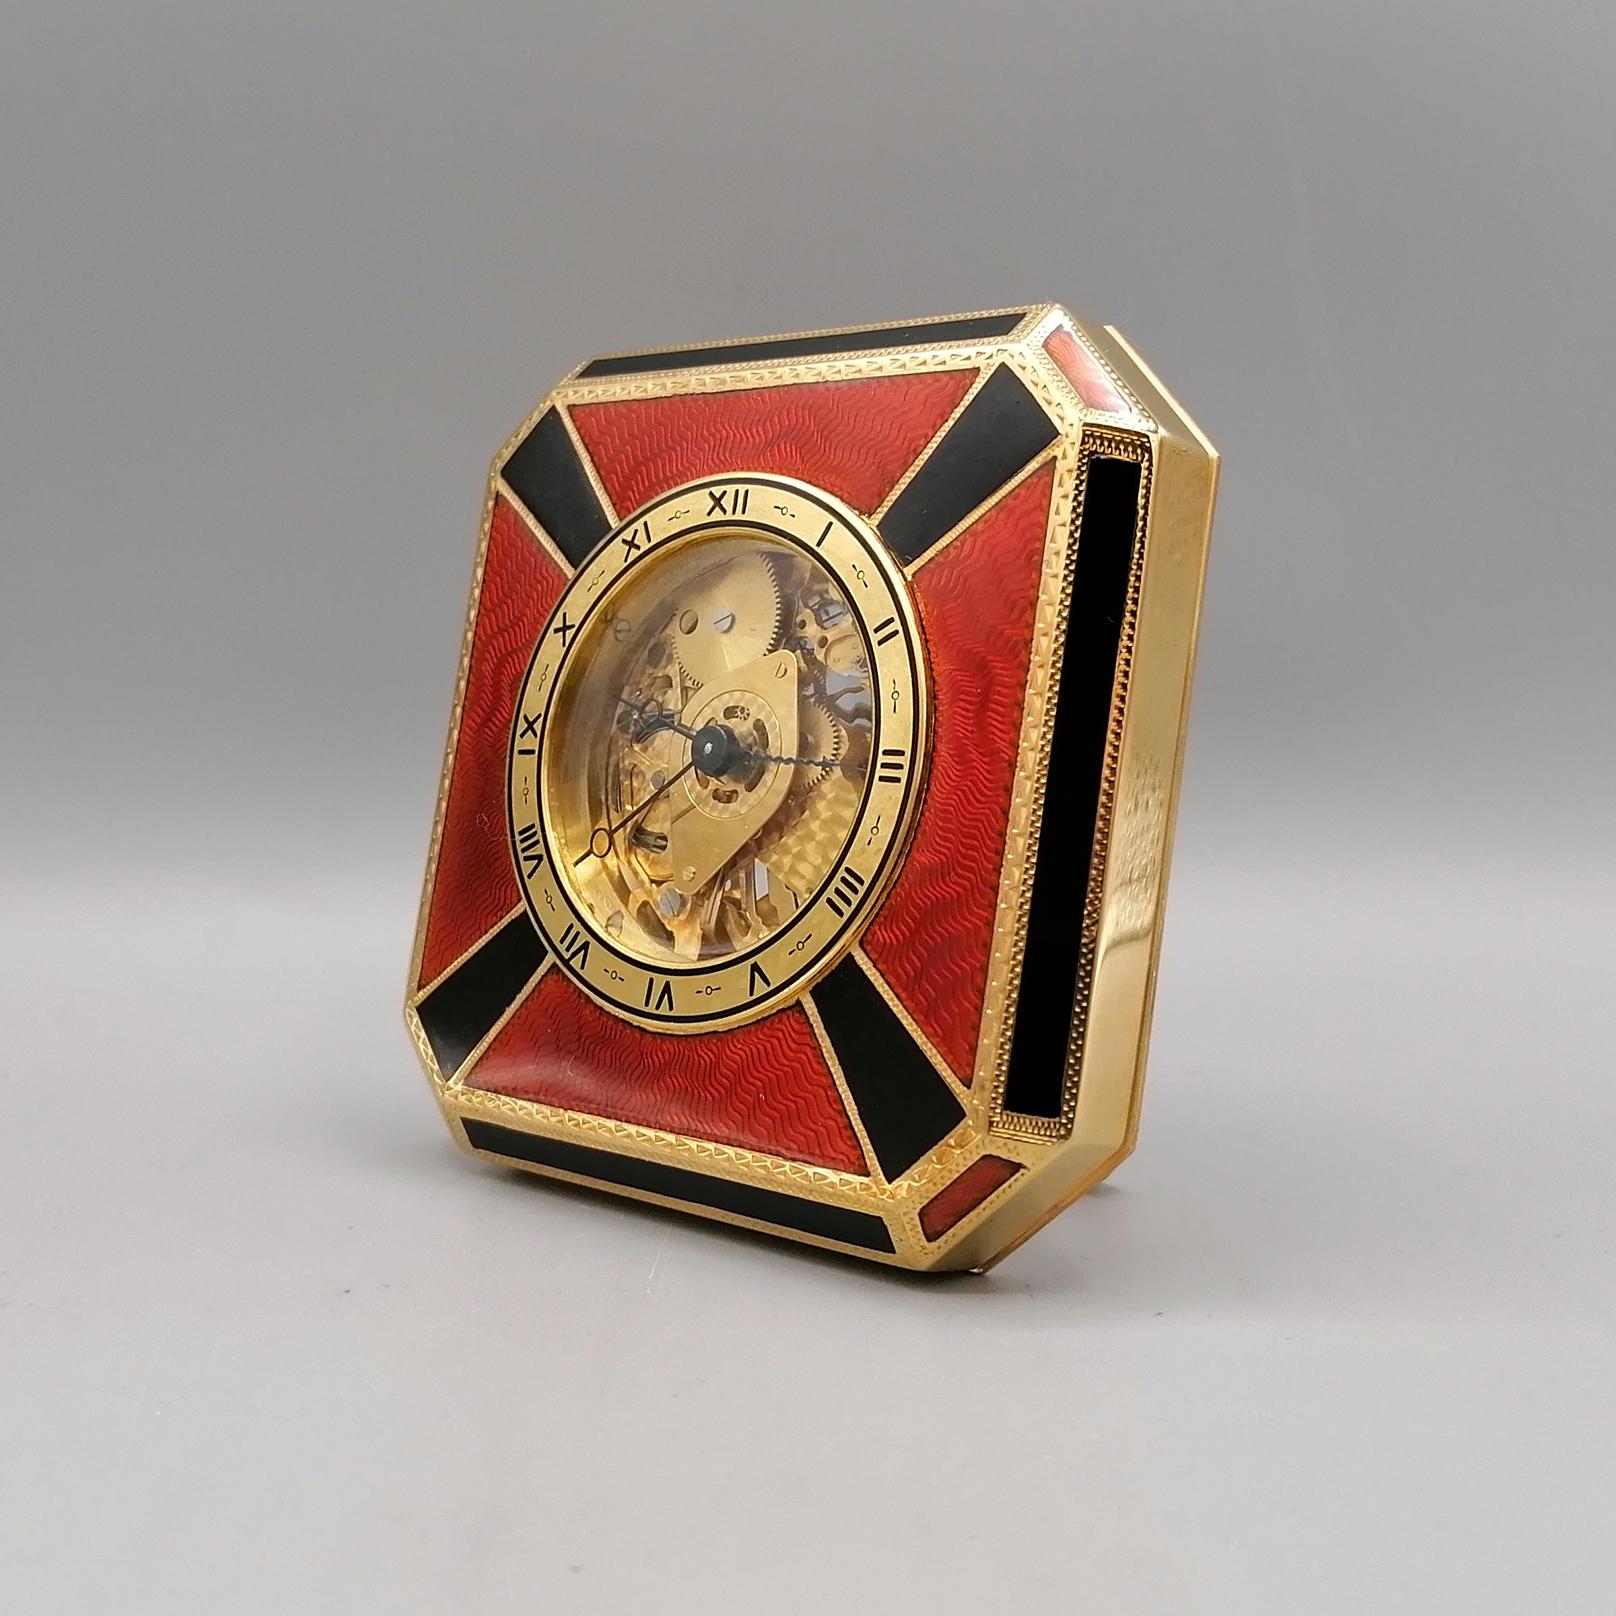 Art deco octagonal table clock cm. 10x10 in 925/1000 gilded silver with translucent black and red fired enamels on guilloché, Swiss mechanical skeletal movement, winding 8 days

The miniatures are hand-painted on a usually white homogeneous enamel